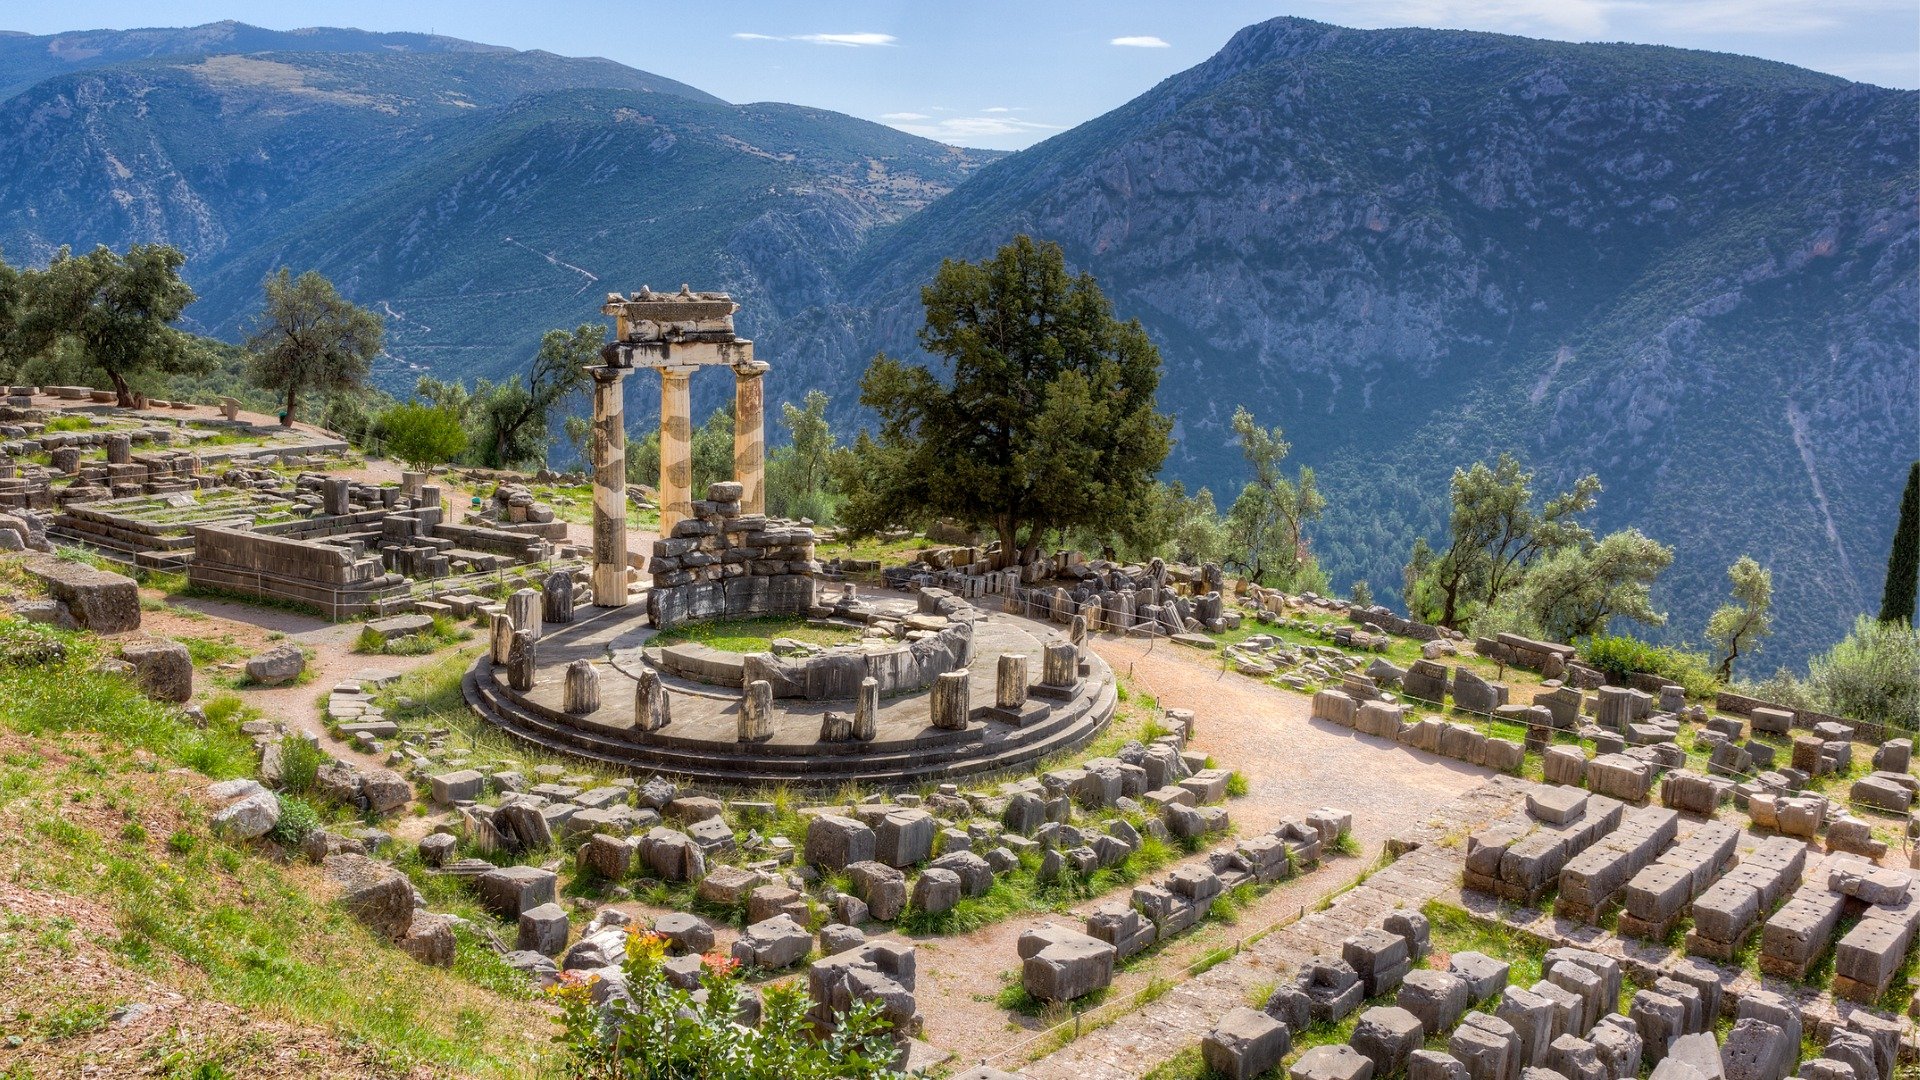 This image shows the Temple of Athena Pronaia in Delphi, one of the best places to visit in mainland Greece. 